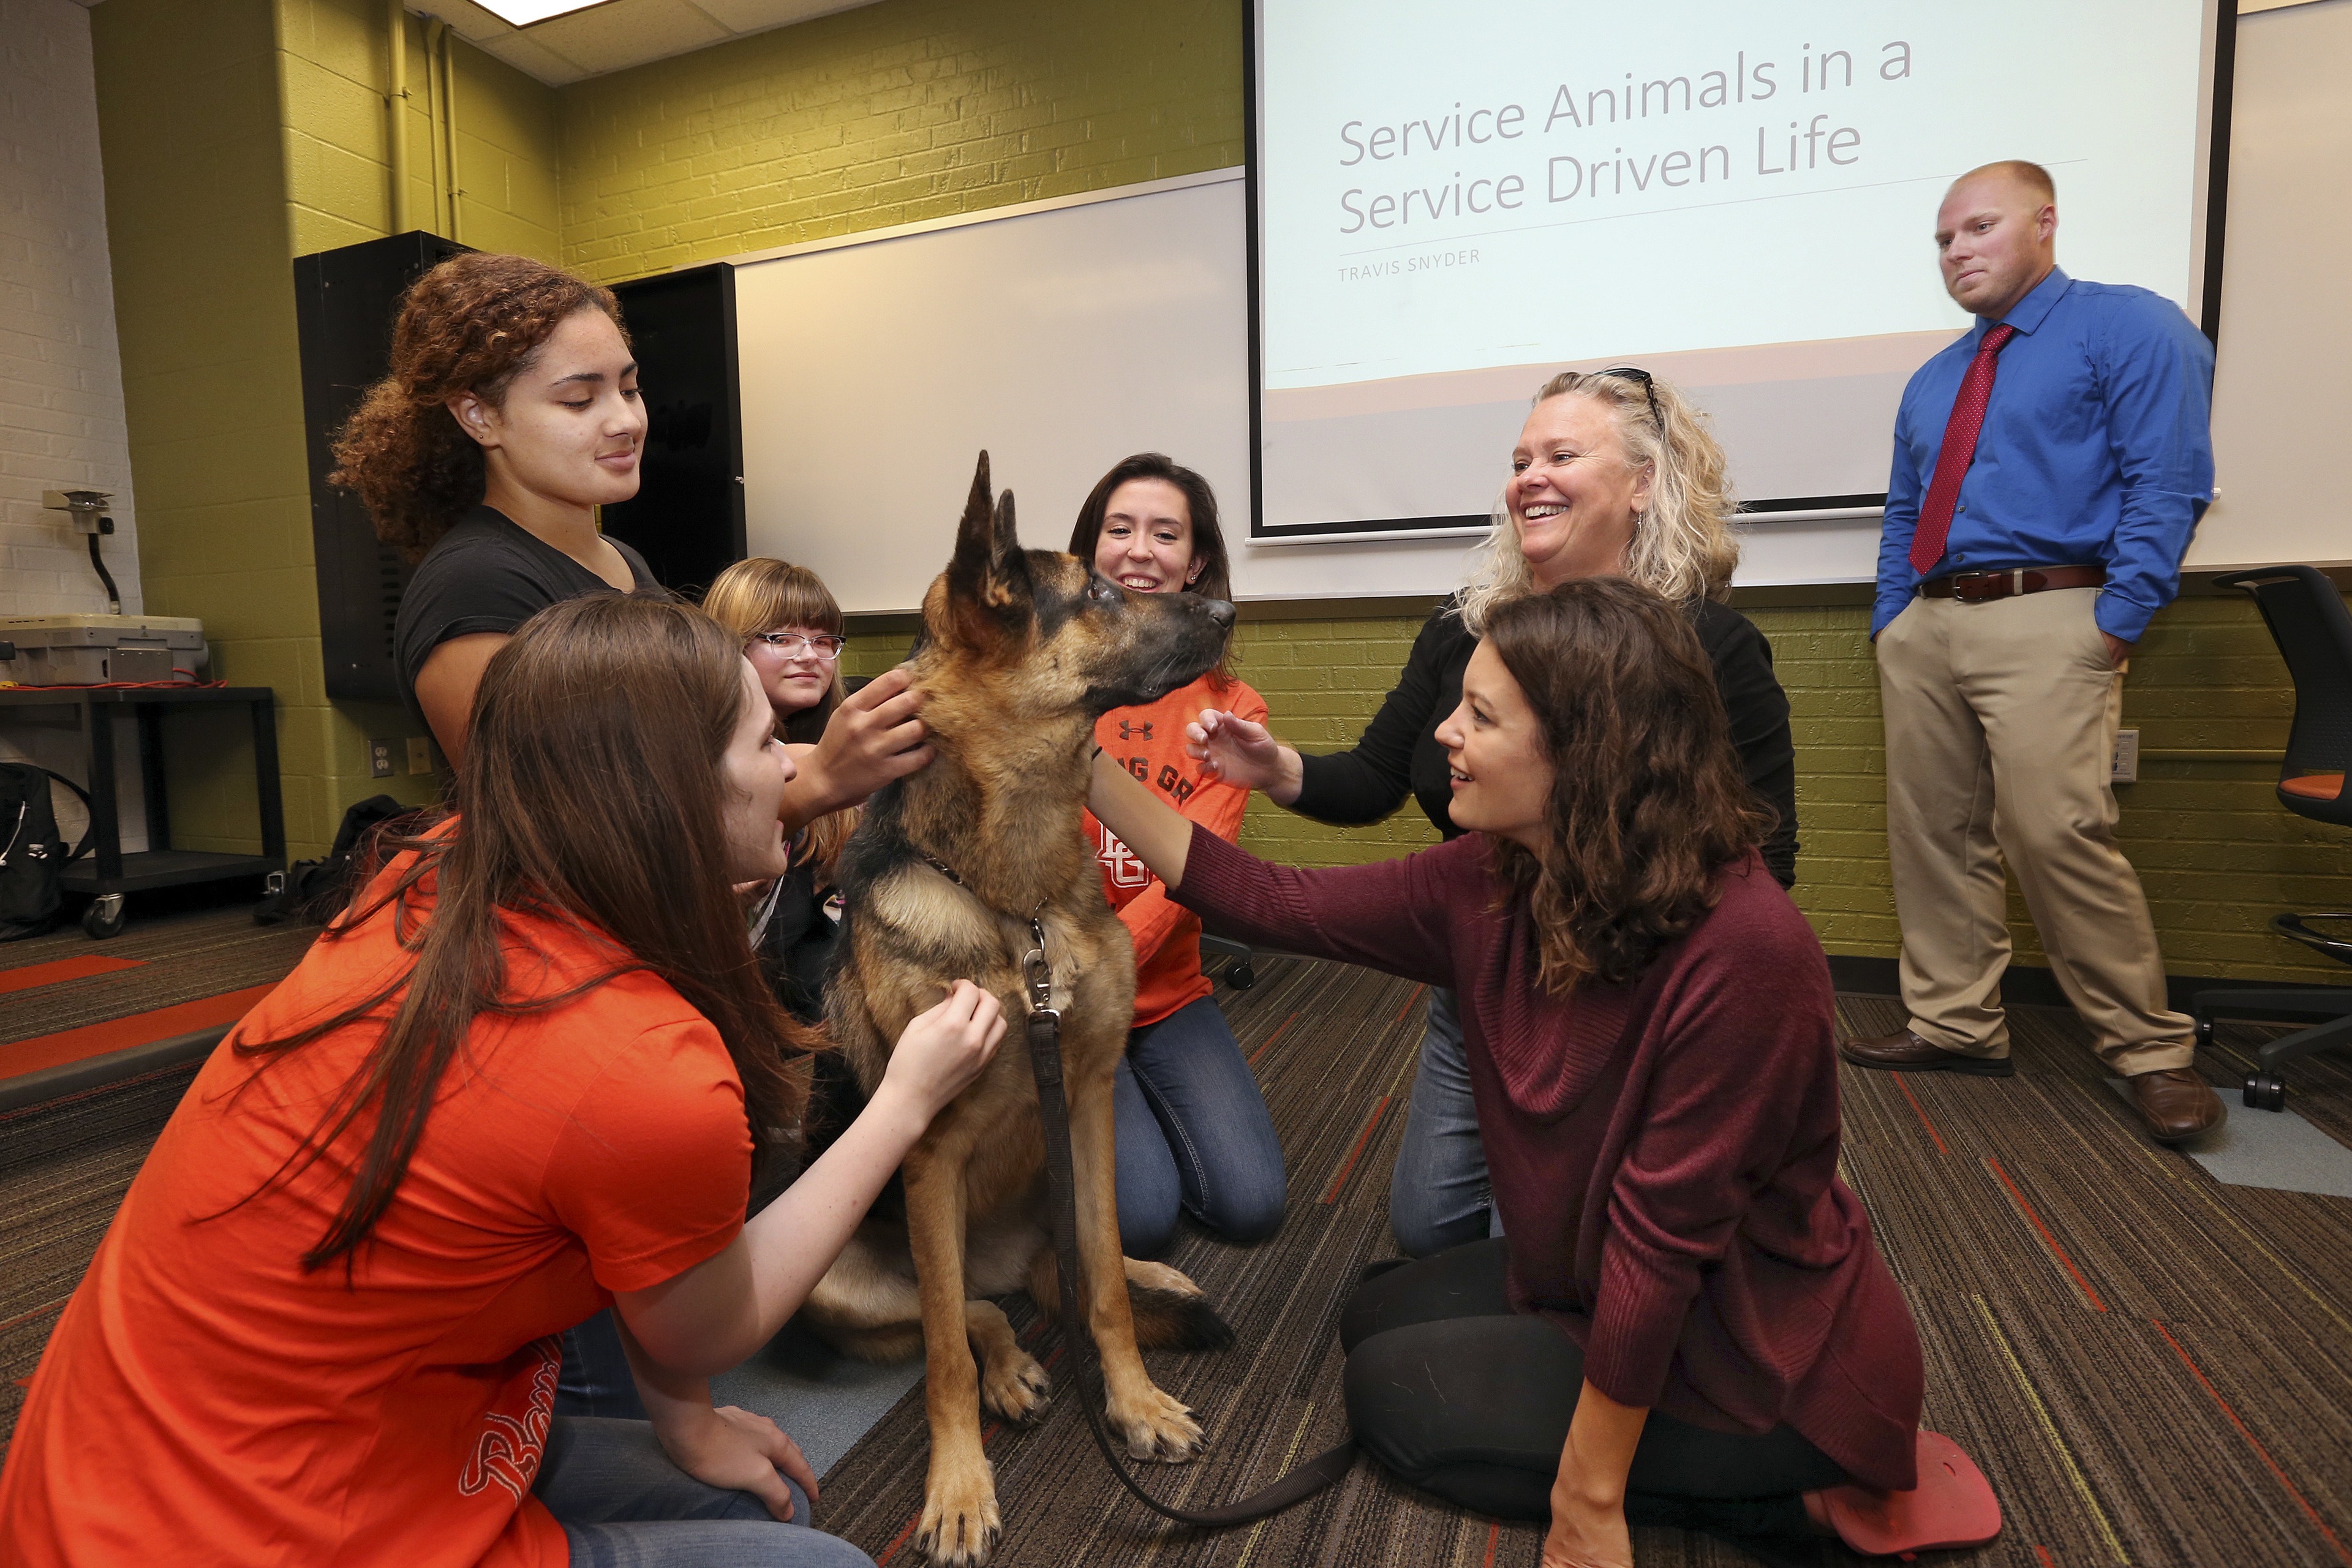 BGSU is an excellent choice for pre-veterinary medicine track studies.